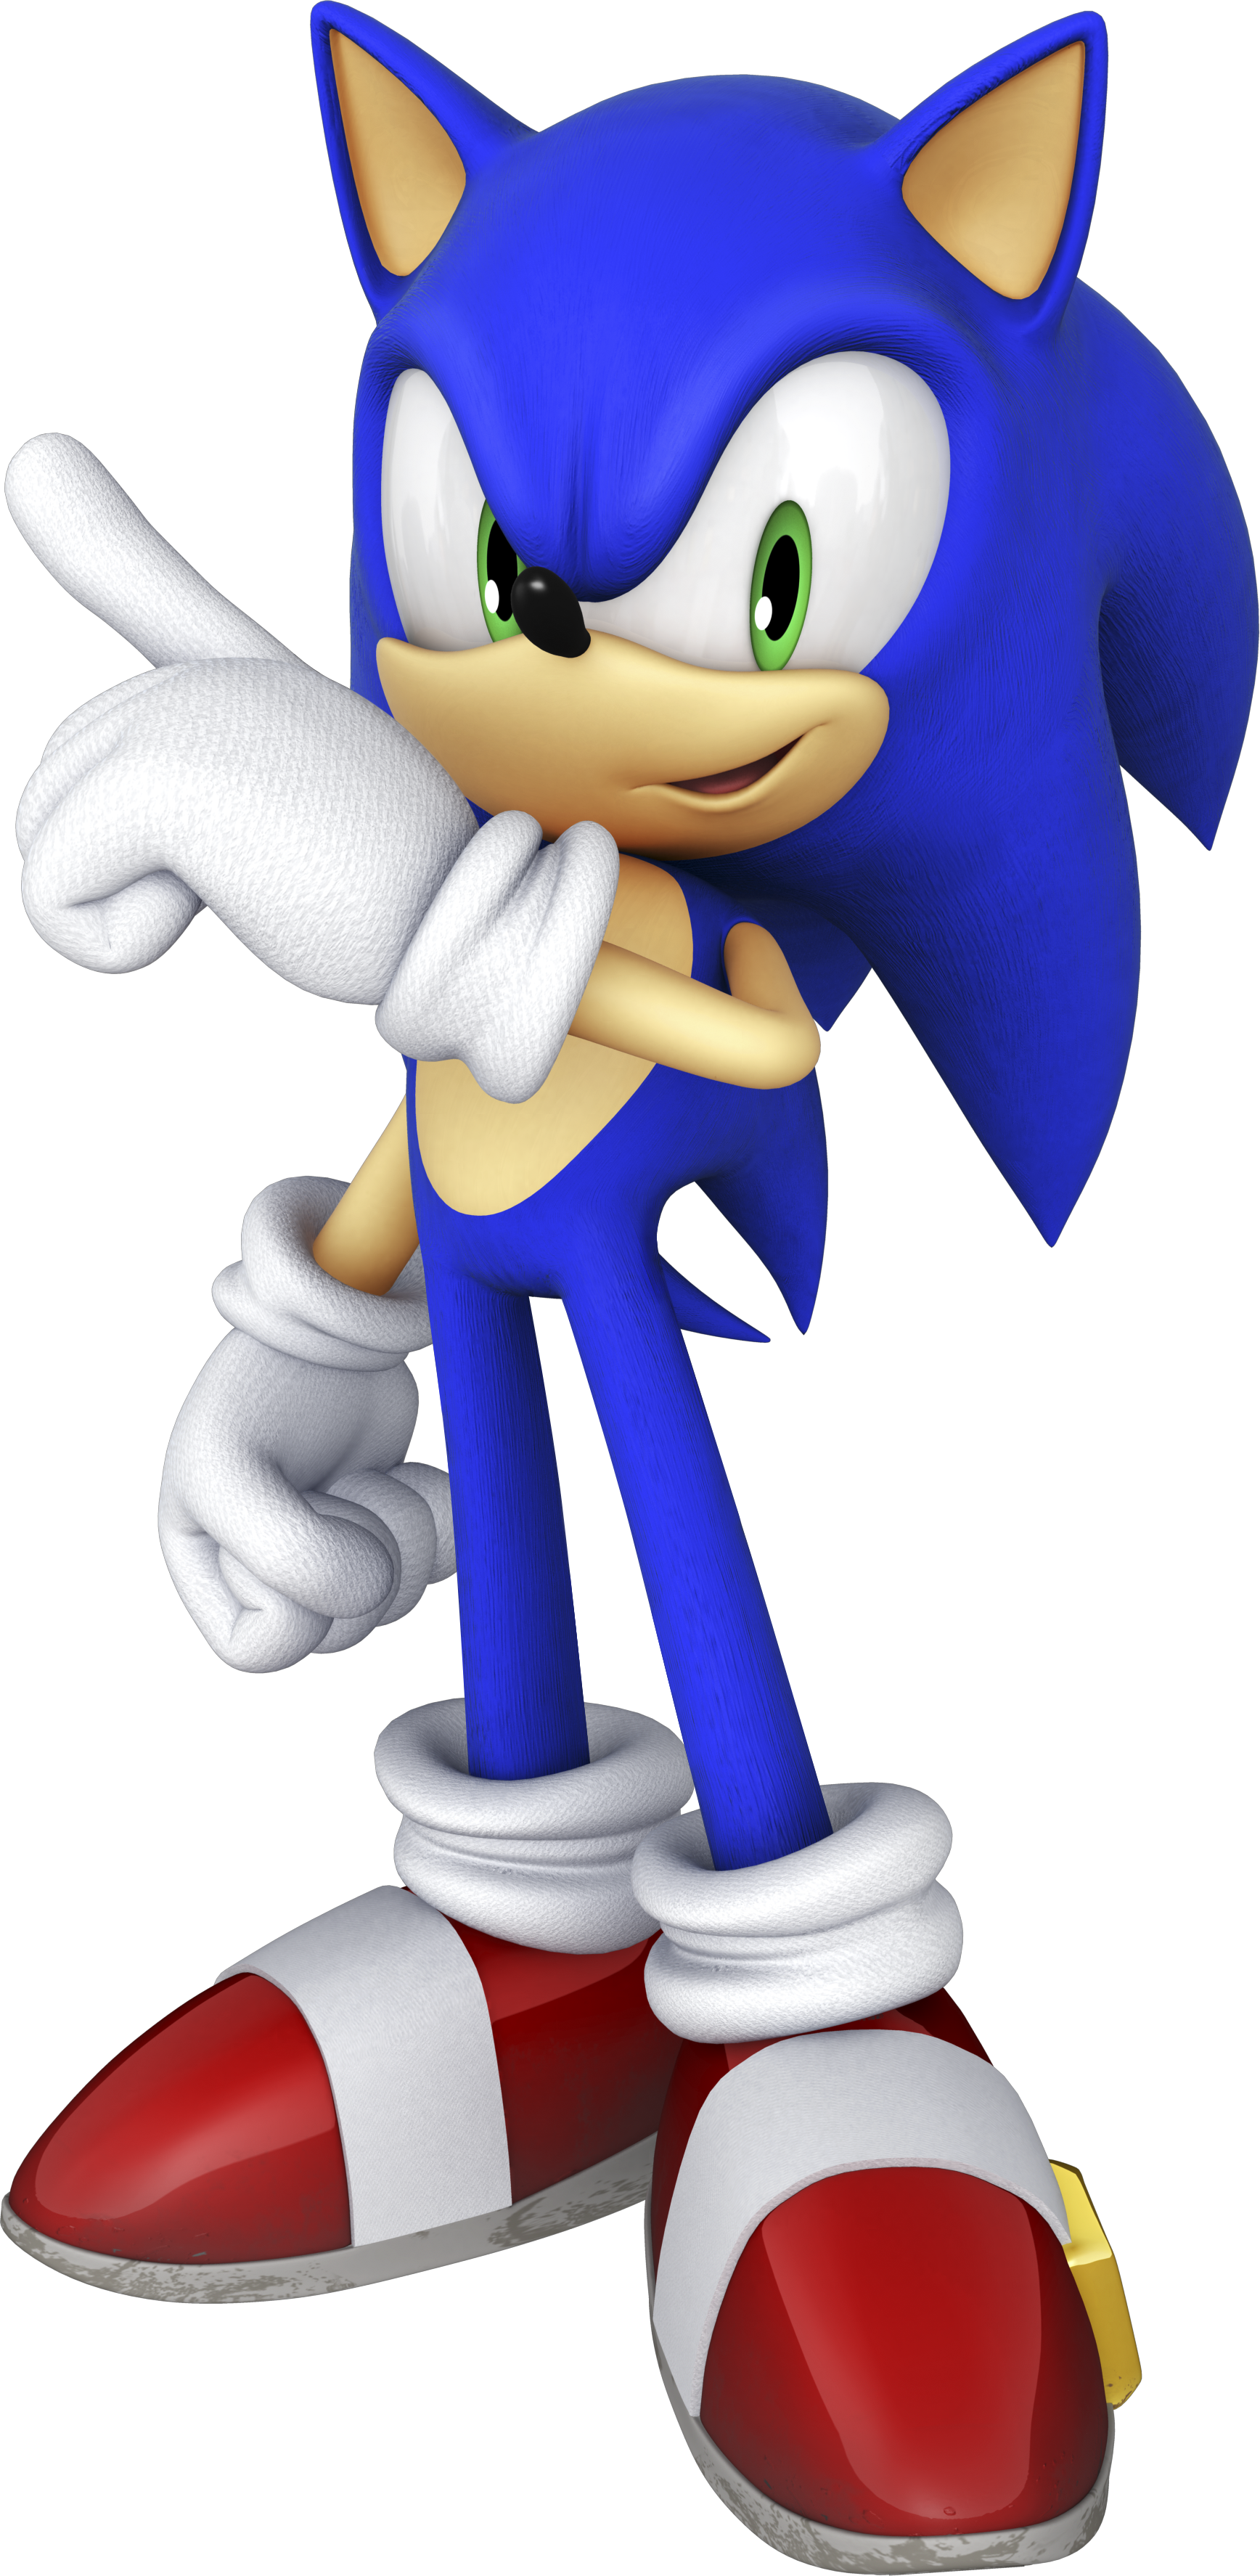 http://images1.wikia.nocookie.net/__cb20130502015253/agk/images/5/59/Sonic_CG27_Chnl.png